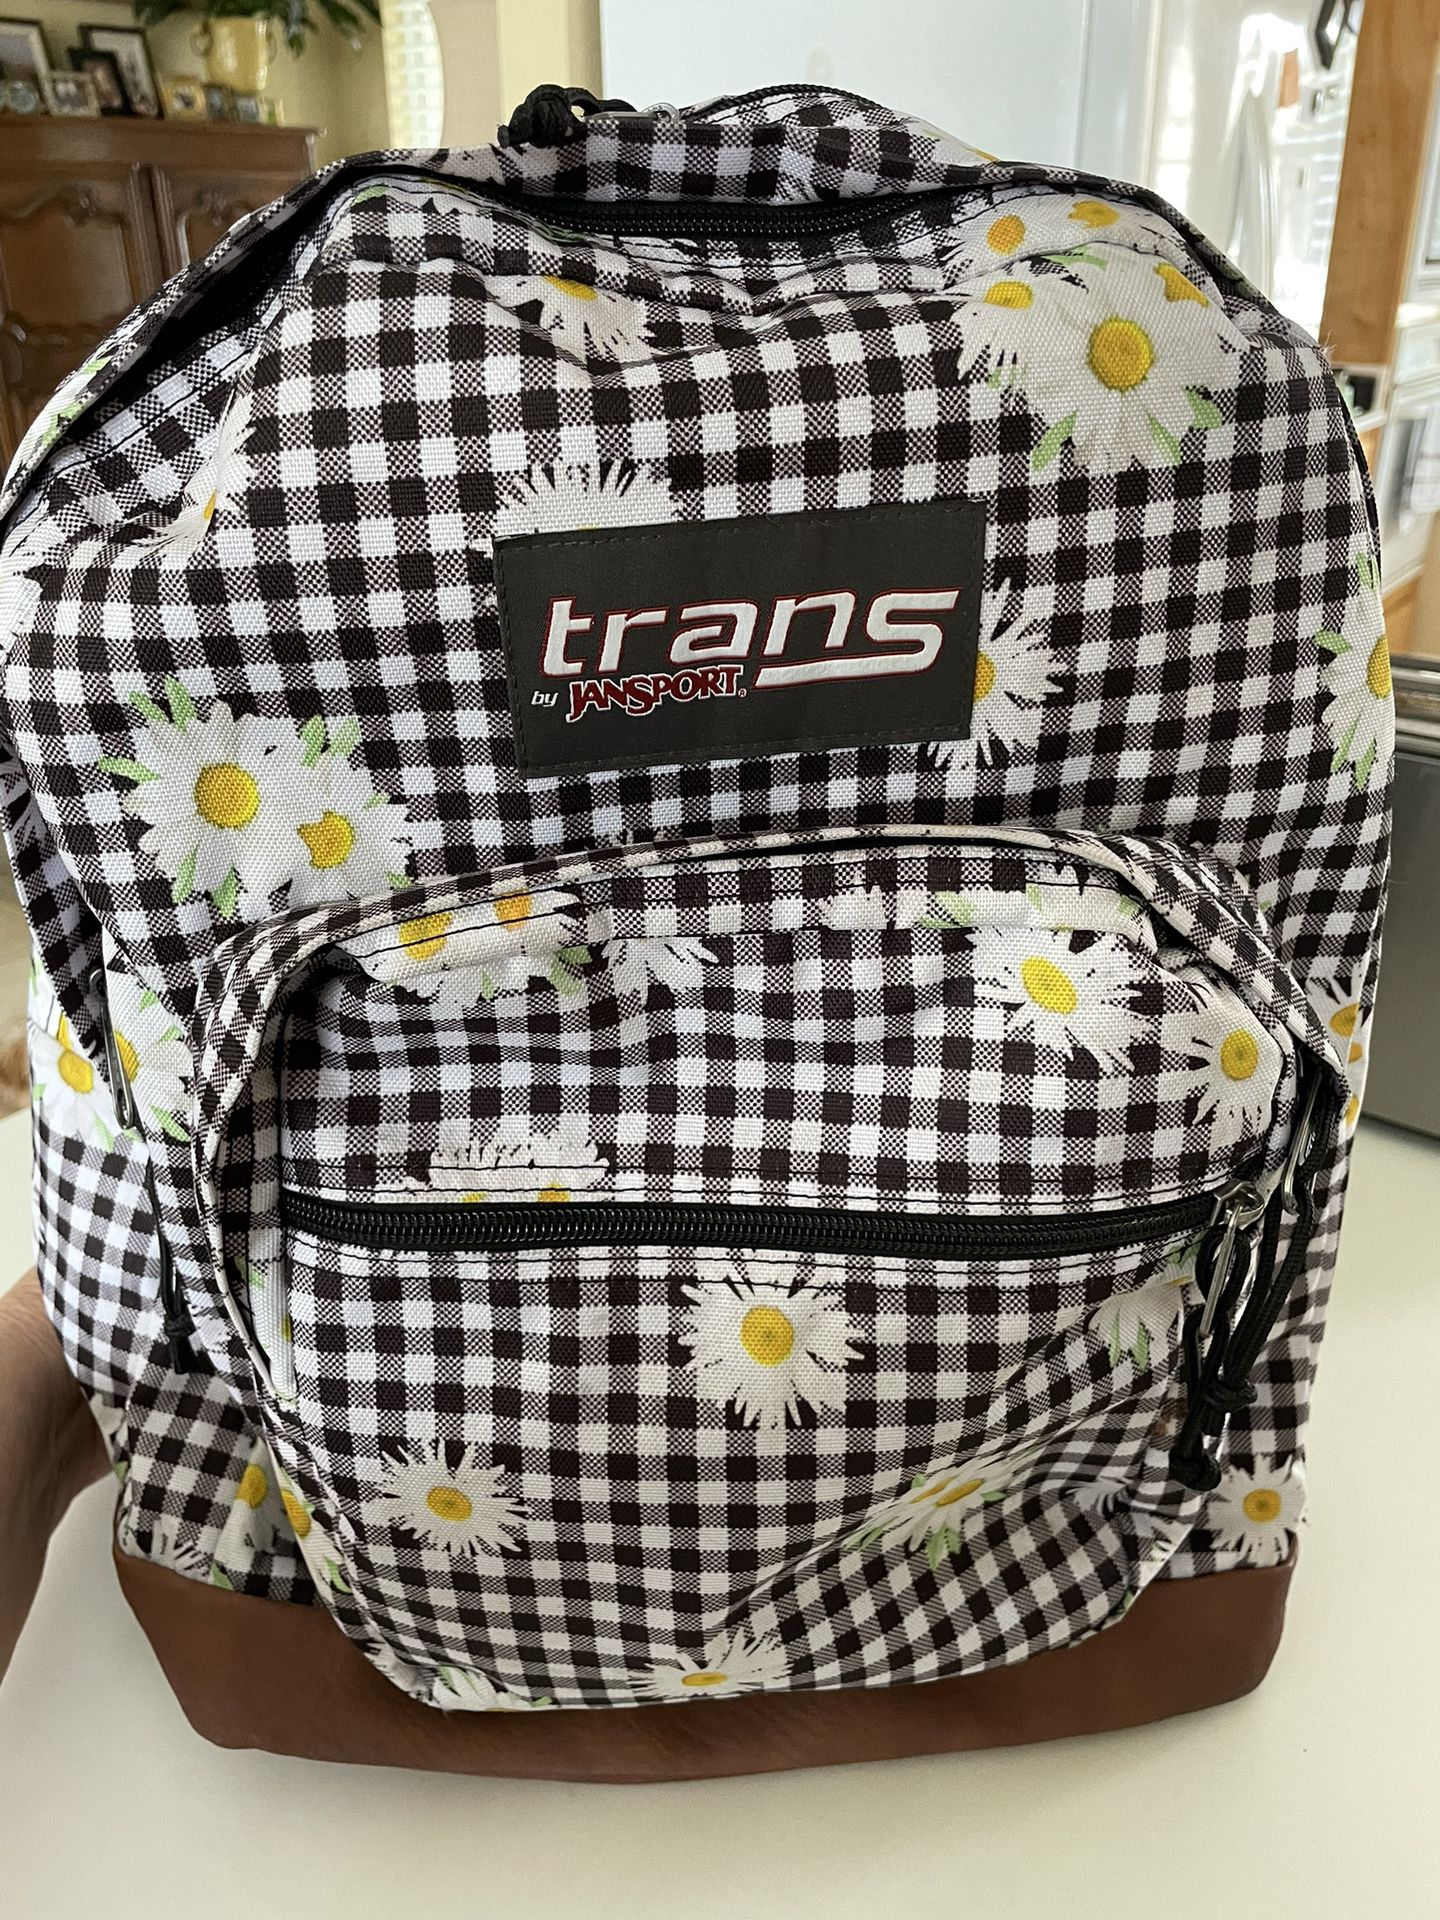 TRANS by JanSport 17" Laptop Sleeve Daisy Backpack 